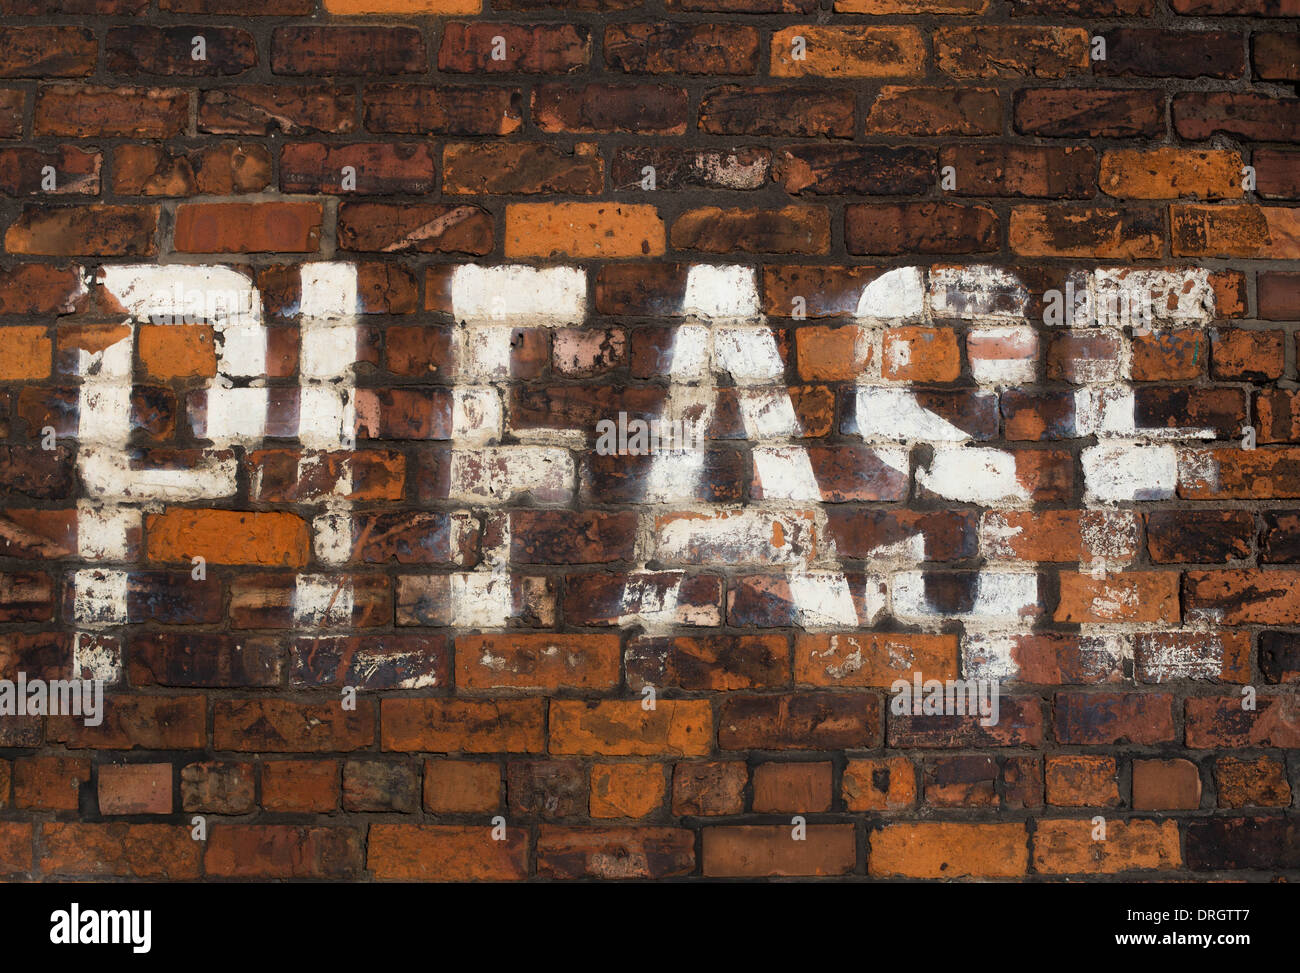 'Please' written on a brick wall with white paint Stock Photo